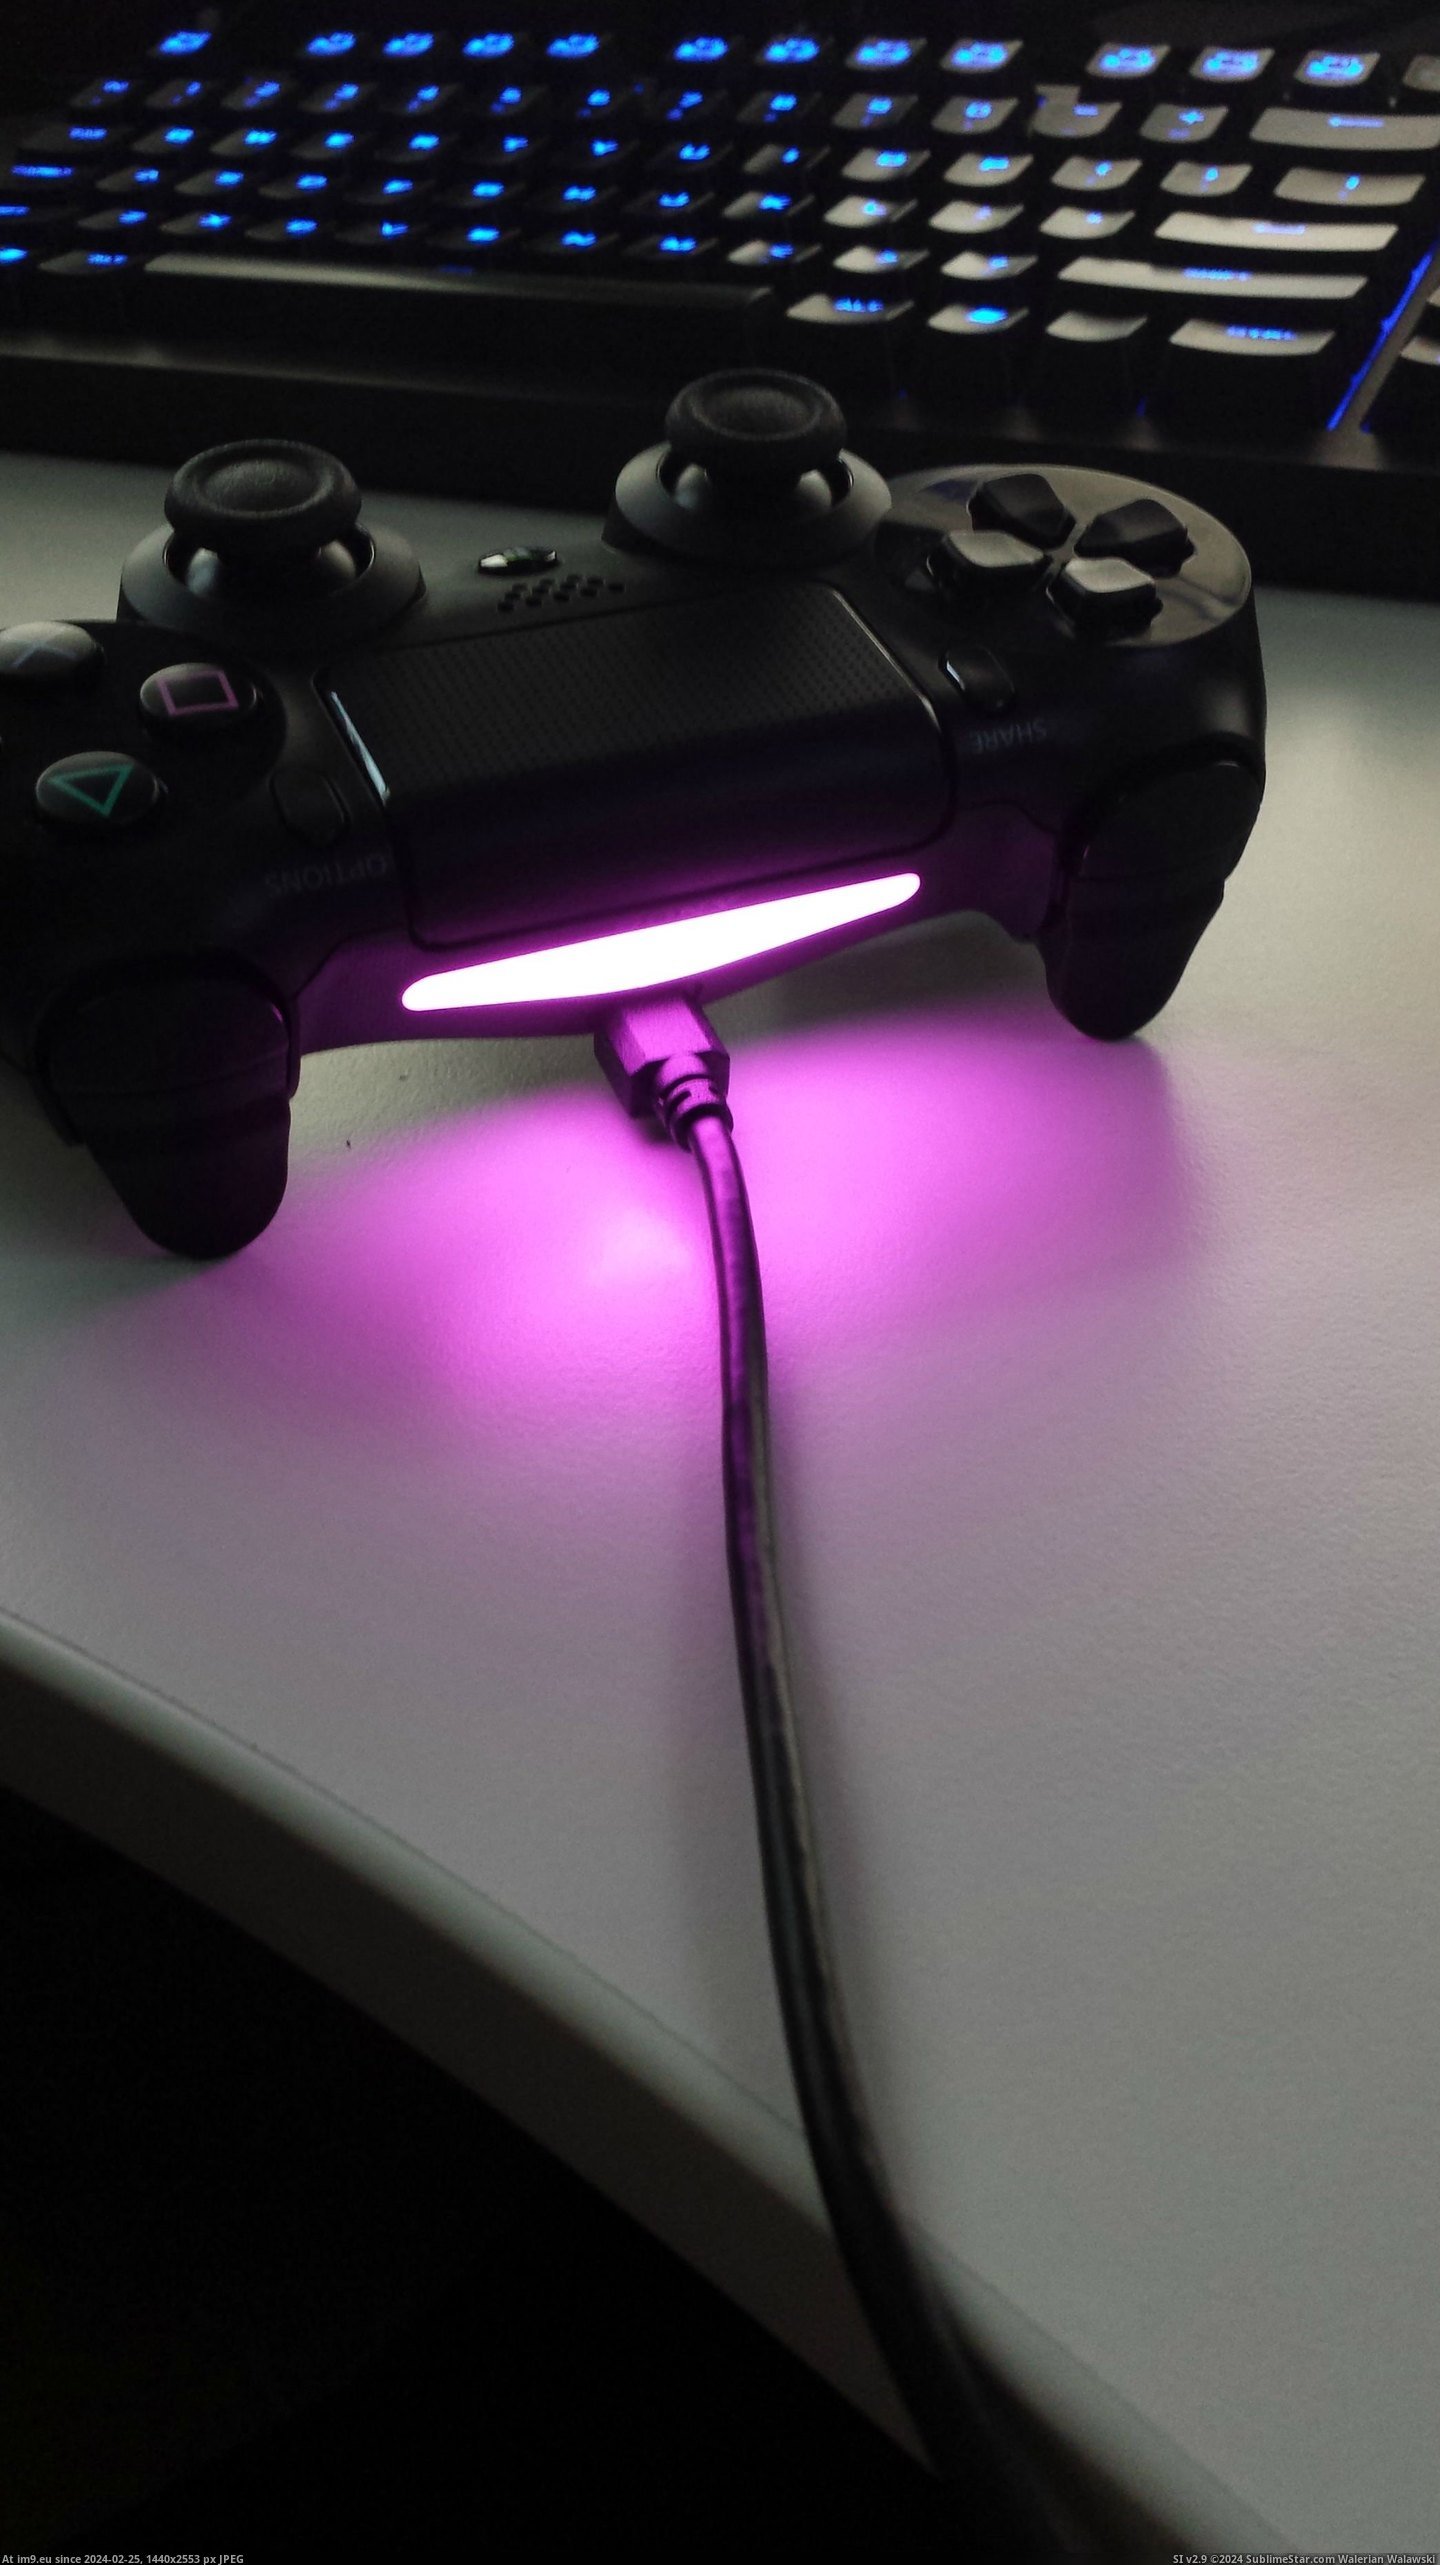 #Gaming #Change #Ps4 #Lightbar #Color #Controller [Gaming] If you use the PS4 controller on the PC, you can change the color of the lightbar. 1 Pic. (Image of album My r/GAMING favs))